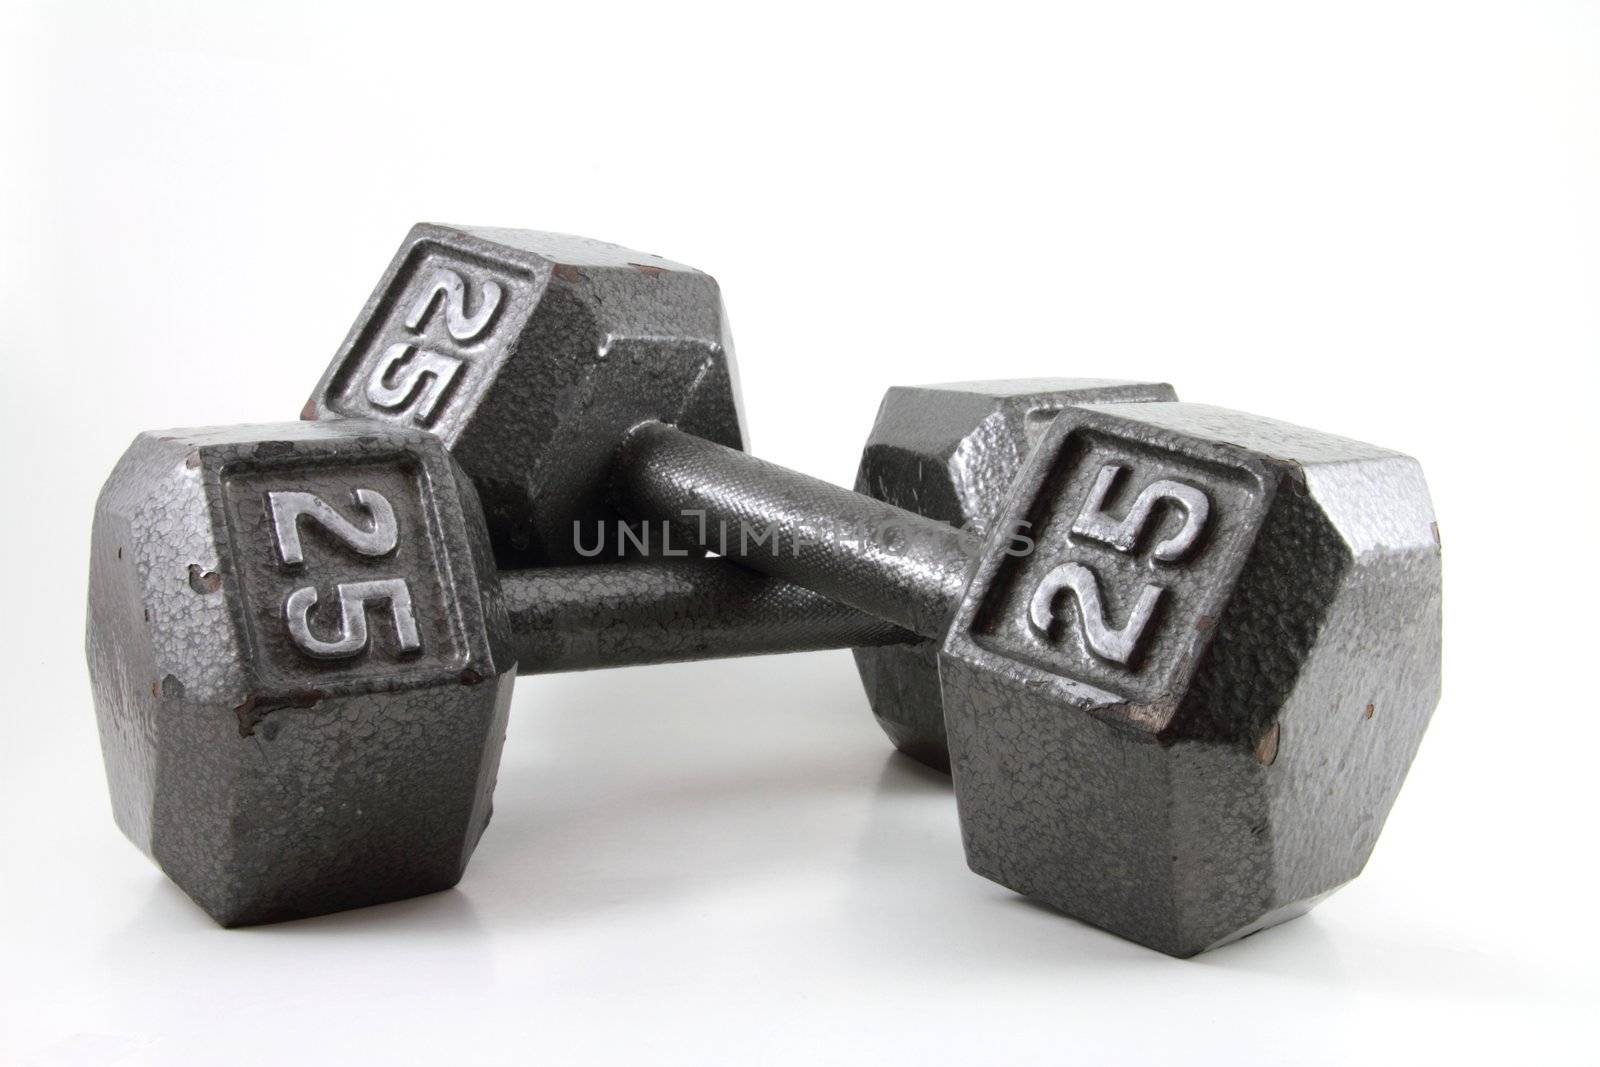 A pair of 25 pound dumbbells on a white backgroud.